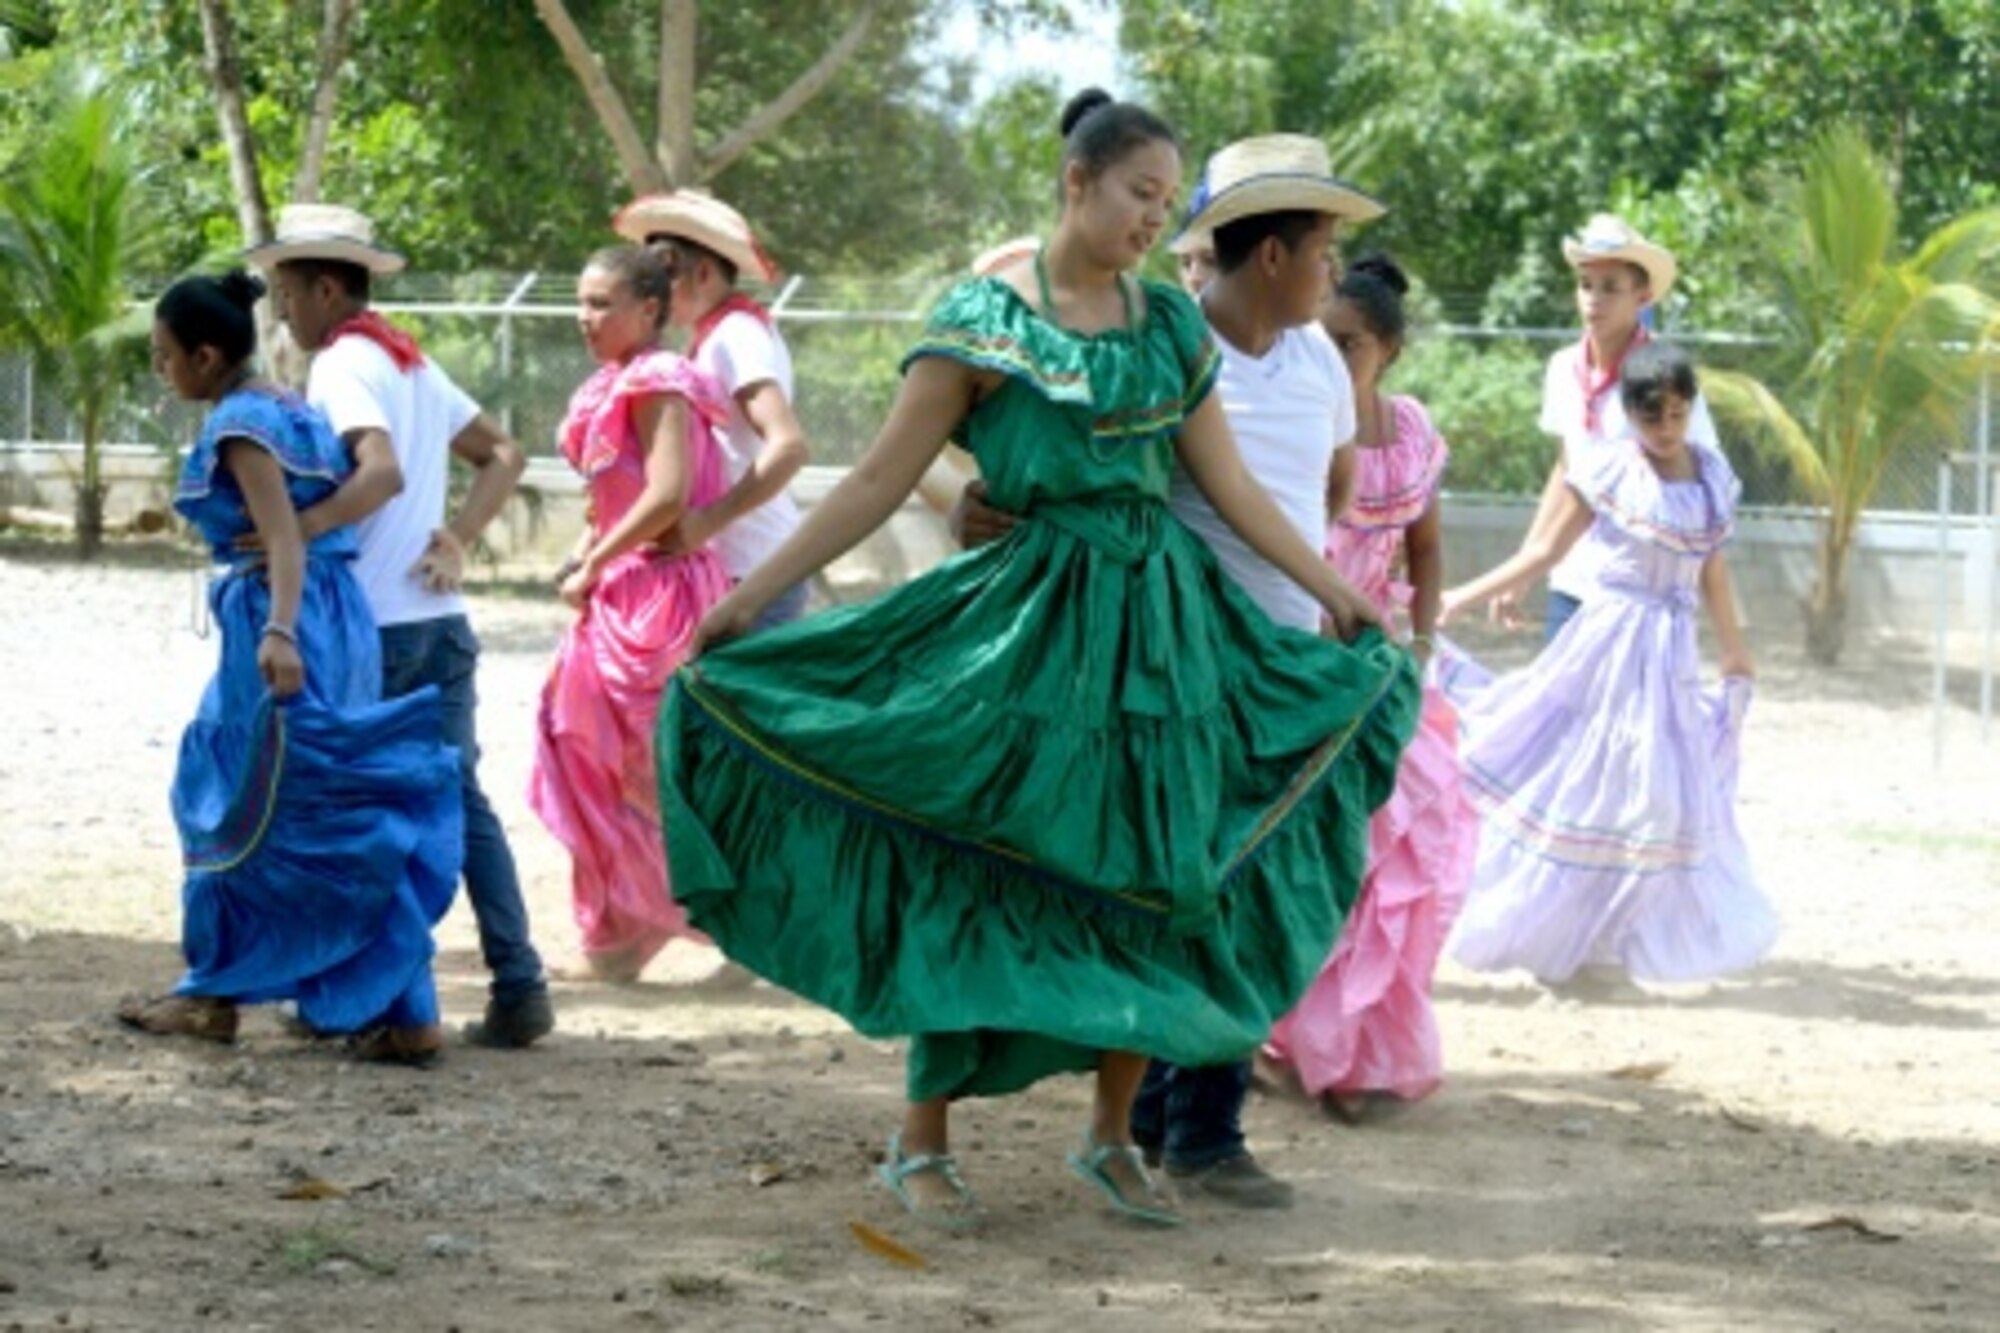 Gabriela Mistral students perform a traditional dance during the ribbon-cutting ceremony at the Gabriela Mistral school in Ocotes Alto, Honduras, July 28, 2015. The ribbon-cutting ceremony celebrated the opening of the new two-classroom schoolhouse. The schoolhouse was one of the key projects that occurred as part of the New Horizons Honduras 2015 training exercise taking place in and around Trujillo, Honduras. New Horizons was launched in the 1980s and is an annual joint humanitarian assistance exercise that U.S. Southern Command conducts with a partner nation in Central America, South America or the Caribbean. The exercise improves joint training readiness of U.S. and partner nation civil engineers, medical professionals and support personnel through humanitarian assistance activities. (U.S. Air Force photo by Capt. David J. Murphy/Released)
